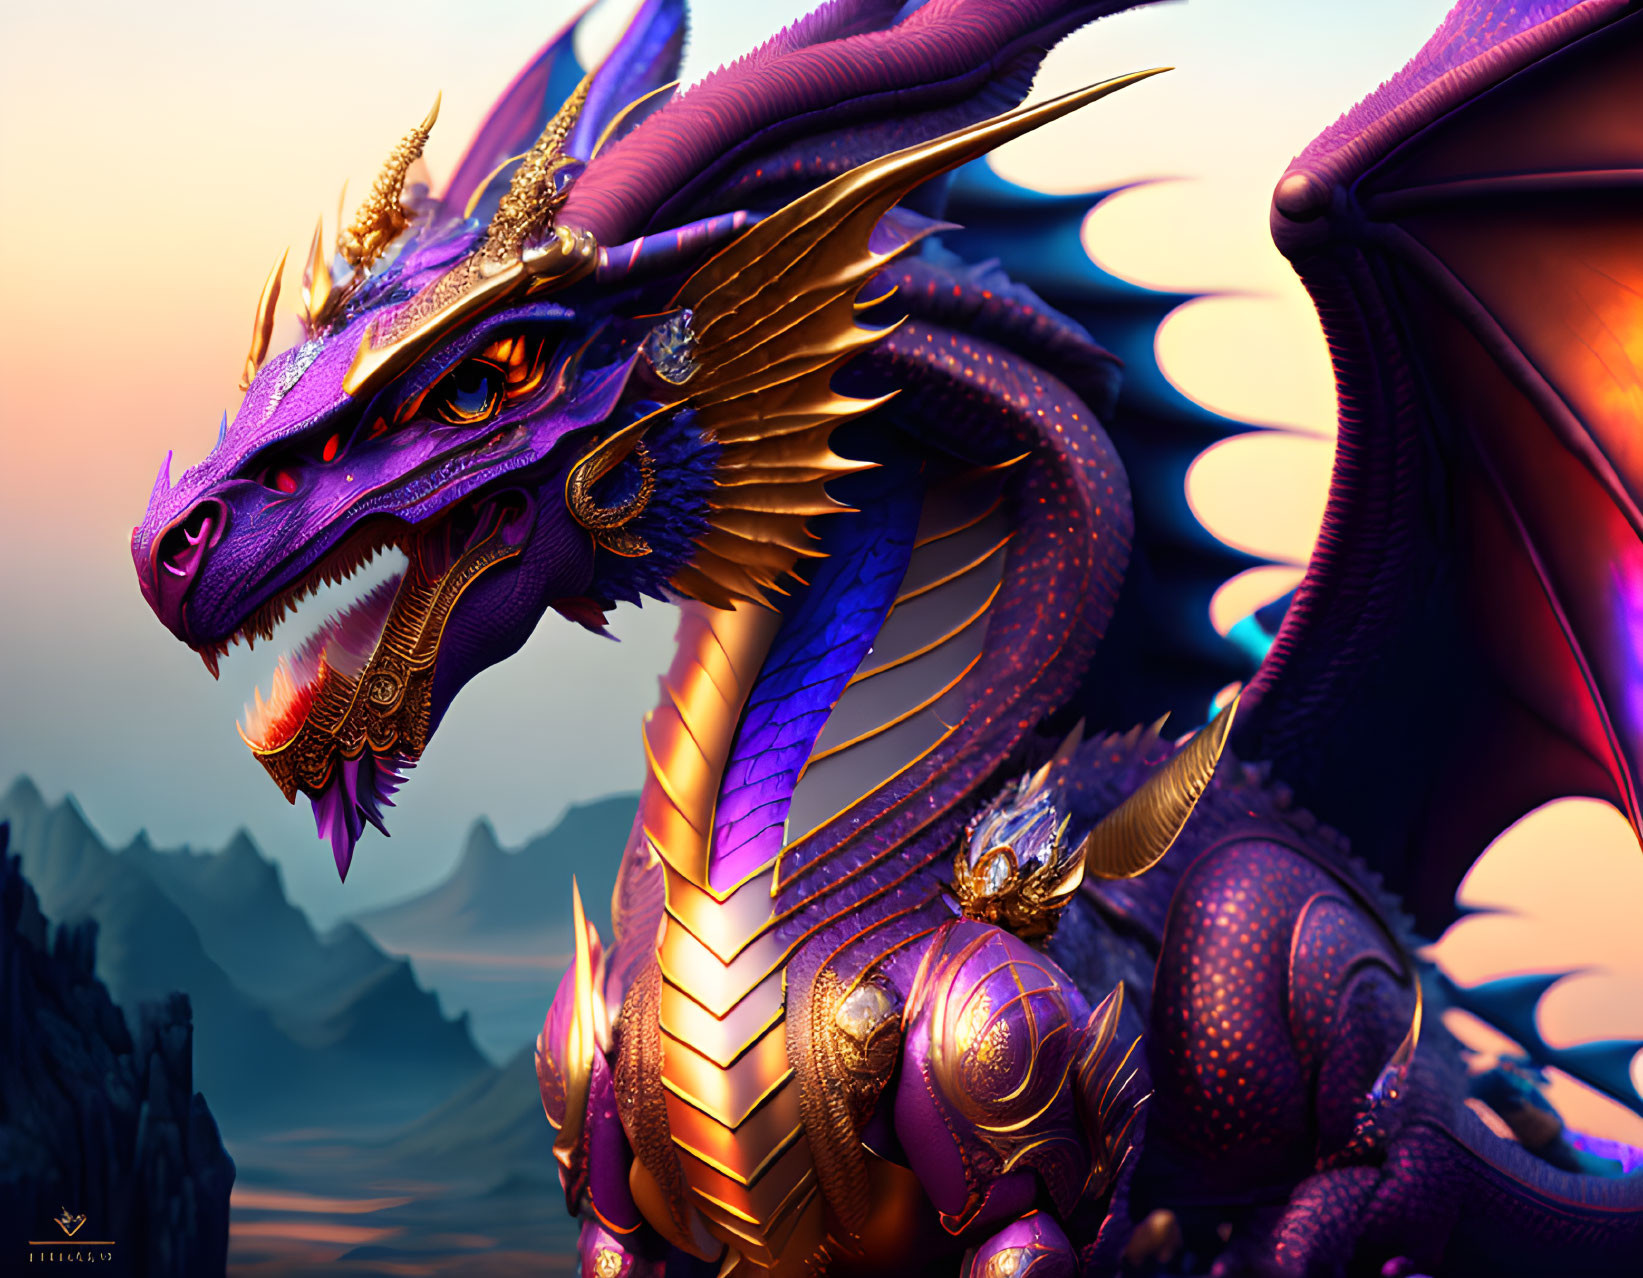 Majestic purple and gold dragon with intricate scales and wings in twilight sky